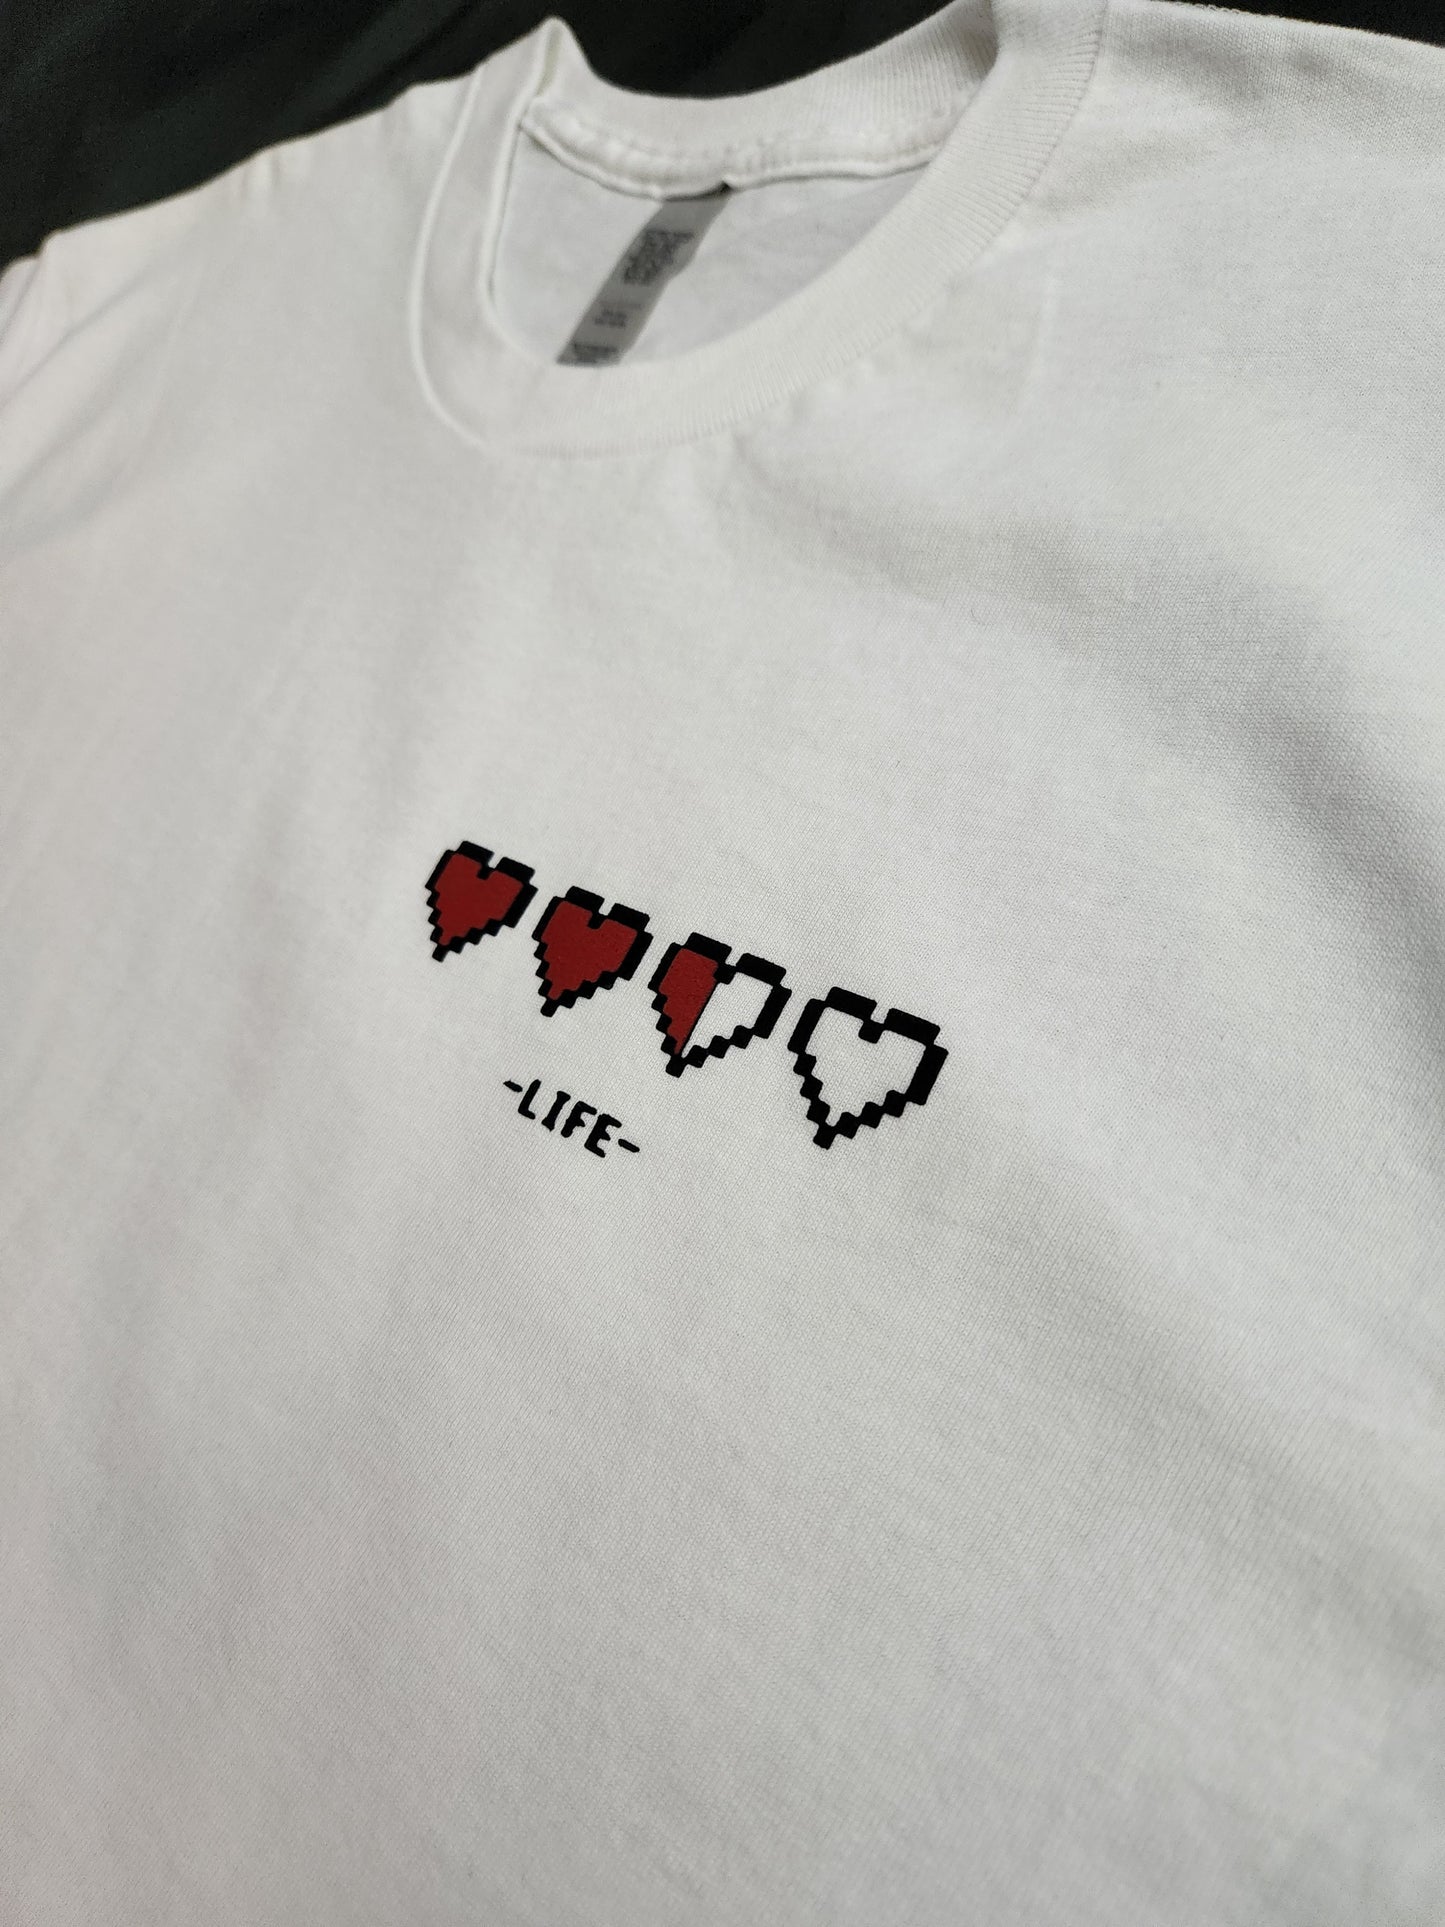 LIFE T-Shirt - Centre Ave Clothing Co.